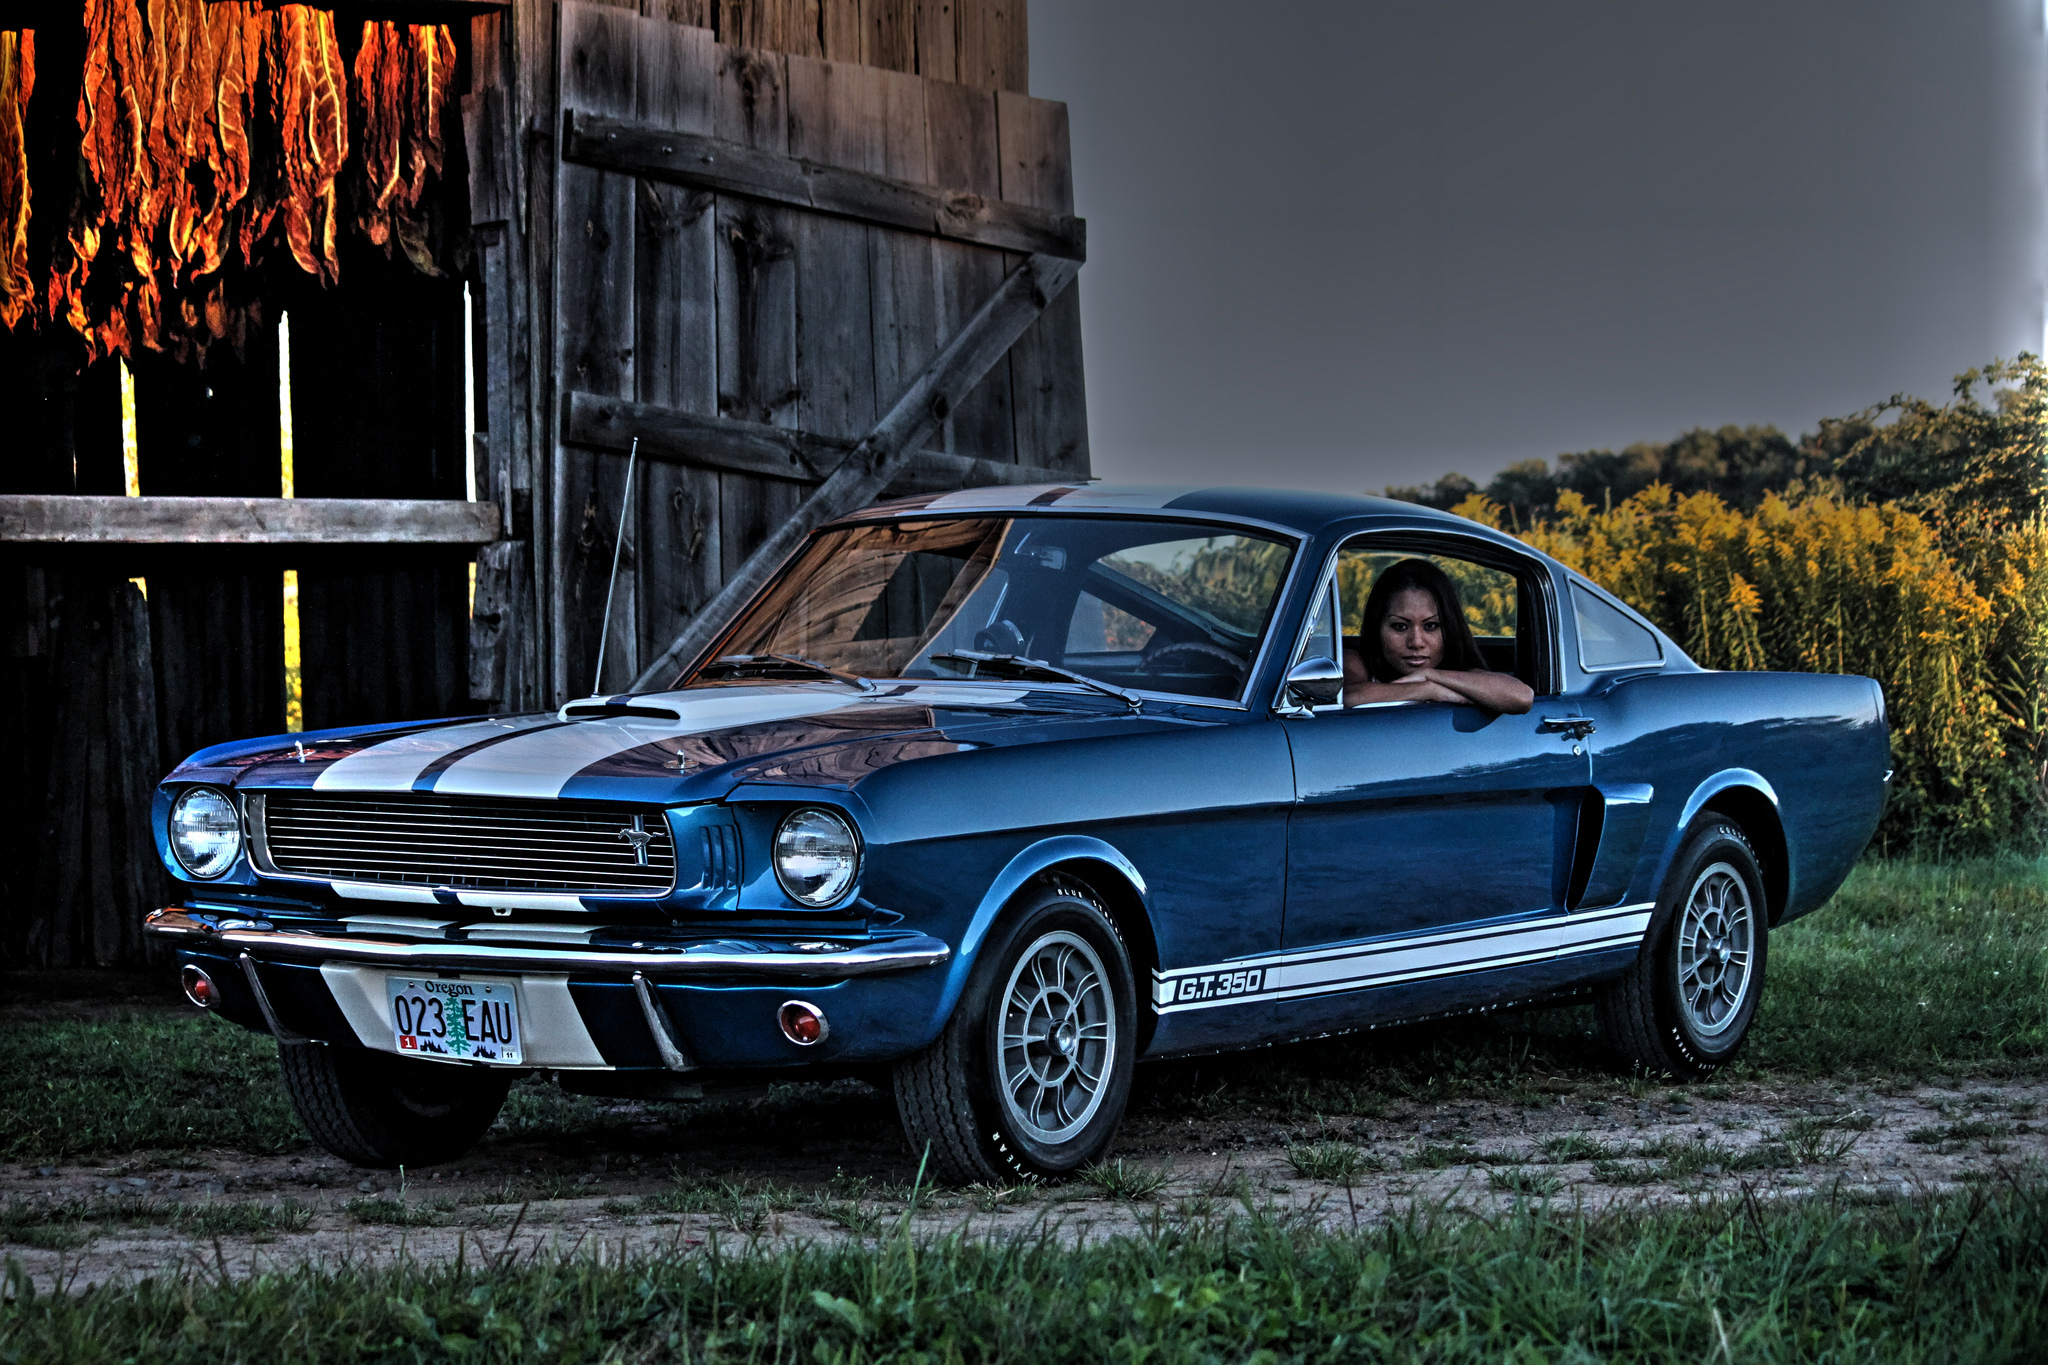 Ford Mustang Shelby Gt350 Best Car Pictures And Wallpaper